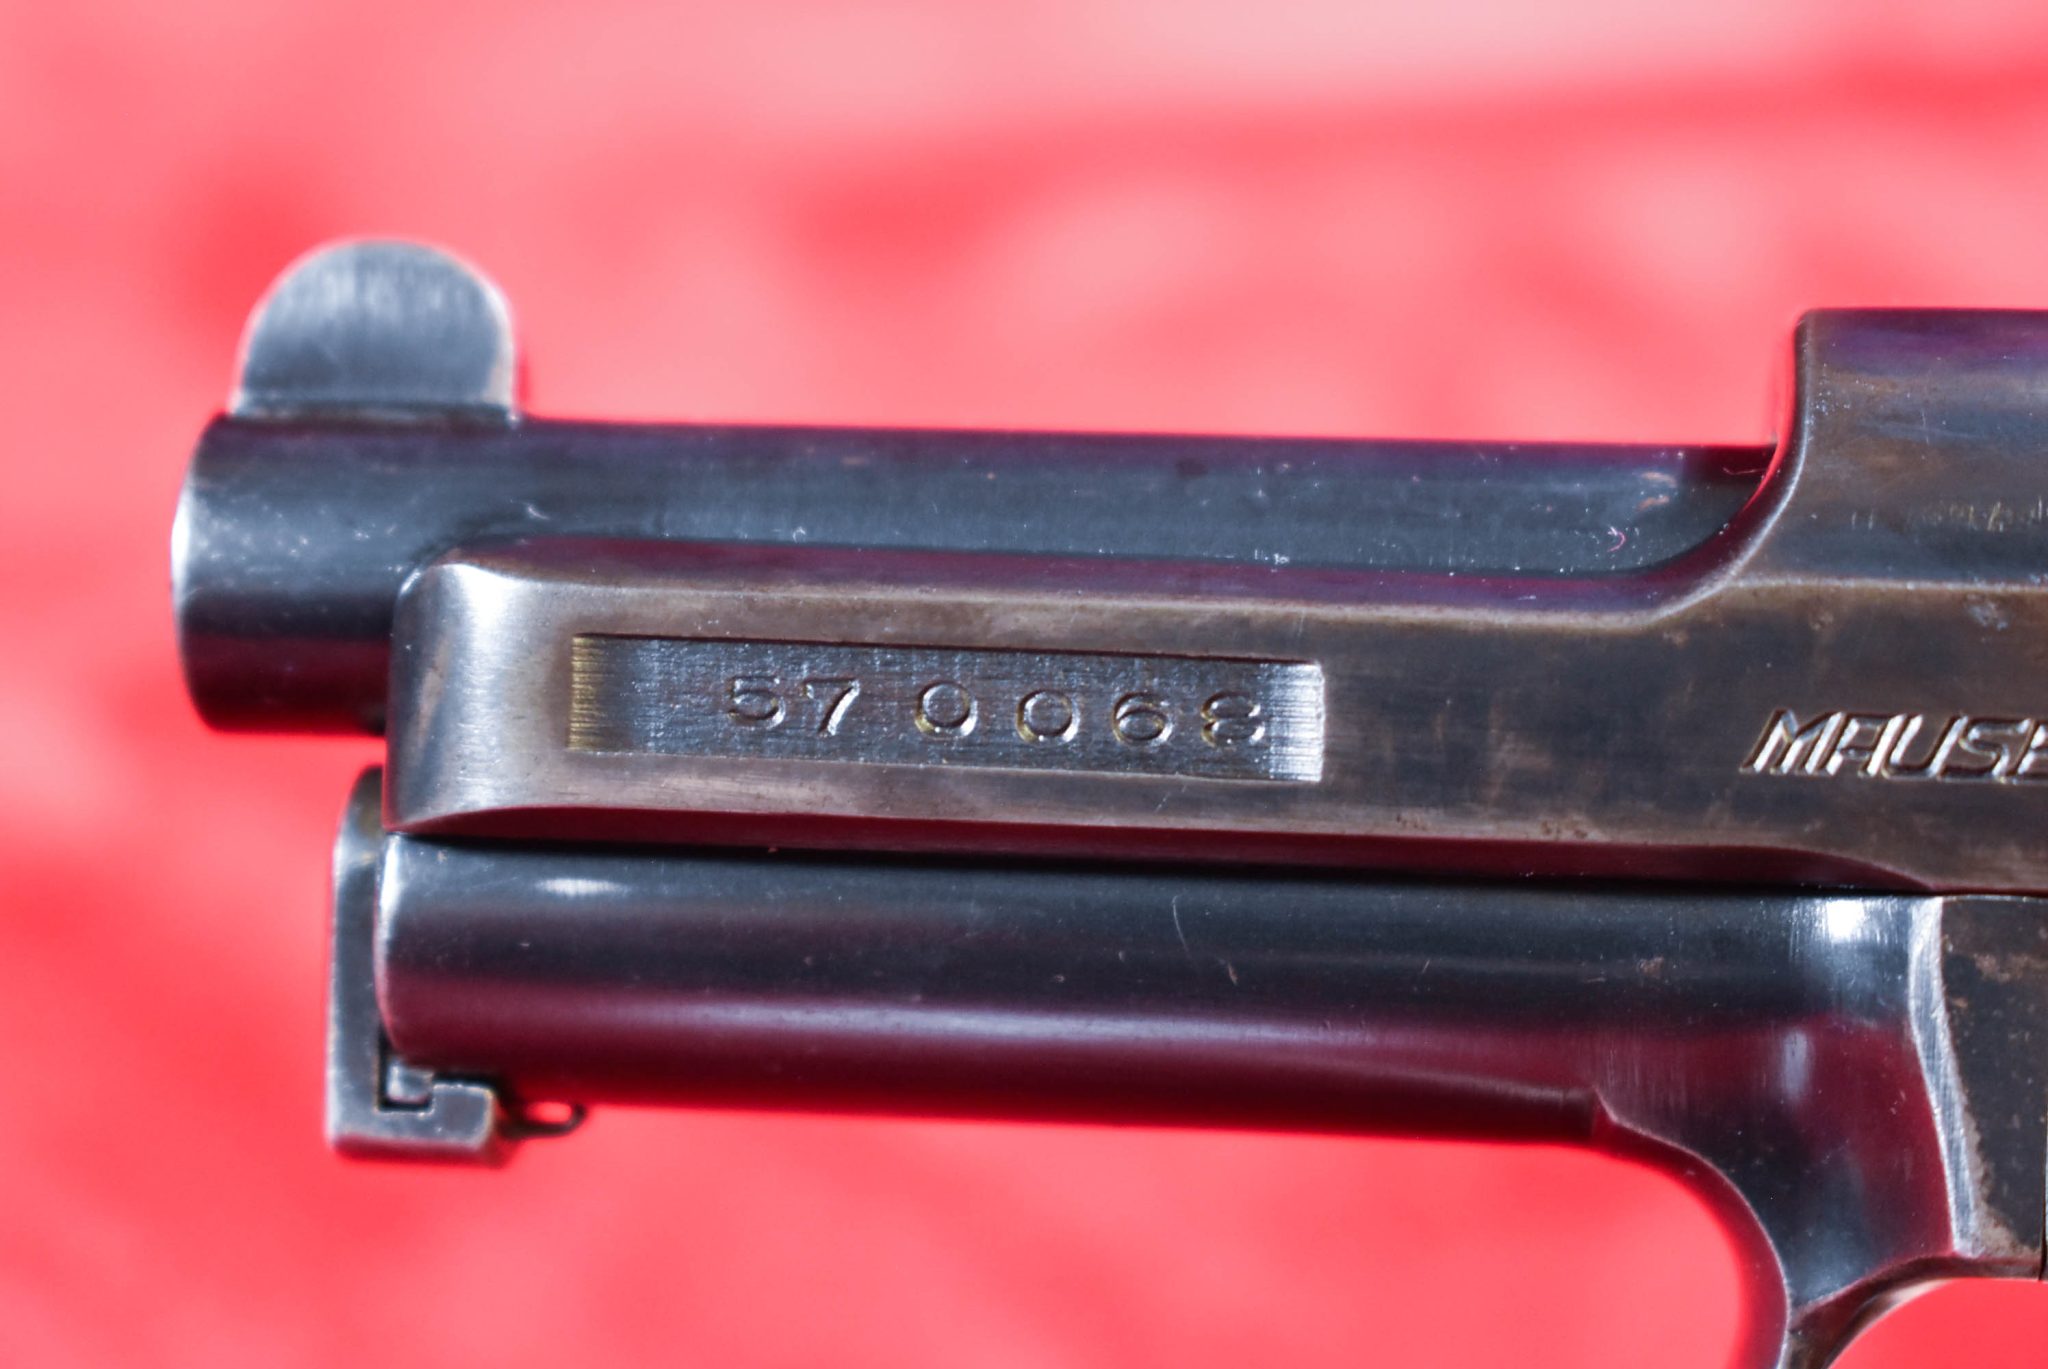 Sold Ultra Rare And Never Seen For Sale Mauser Model 1934 Pistol Nazi Police Eaglel Marked 3262